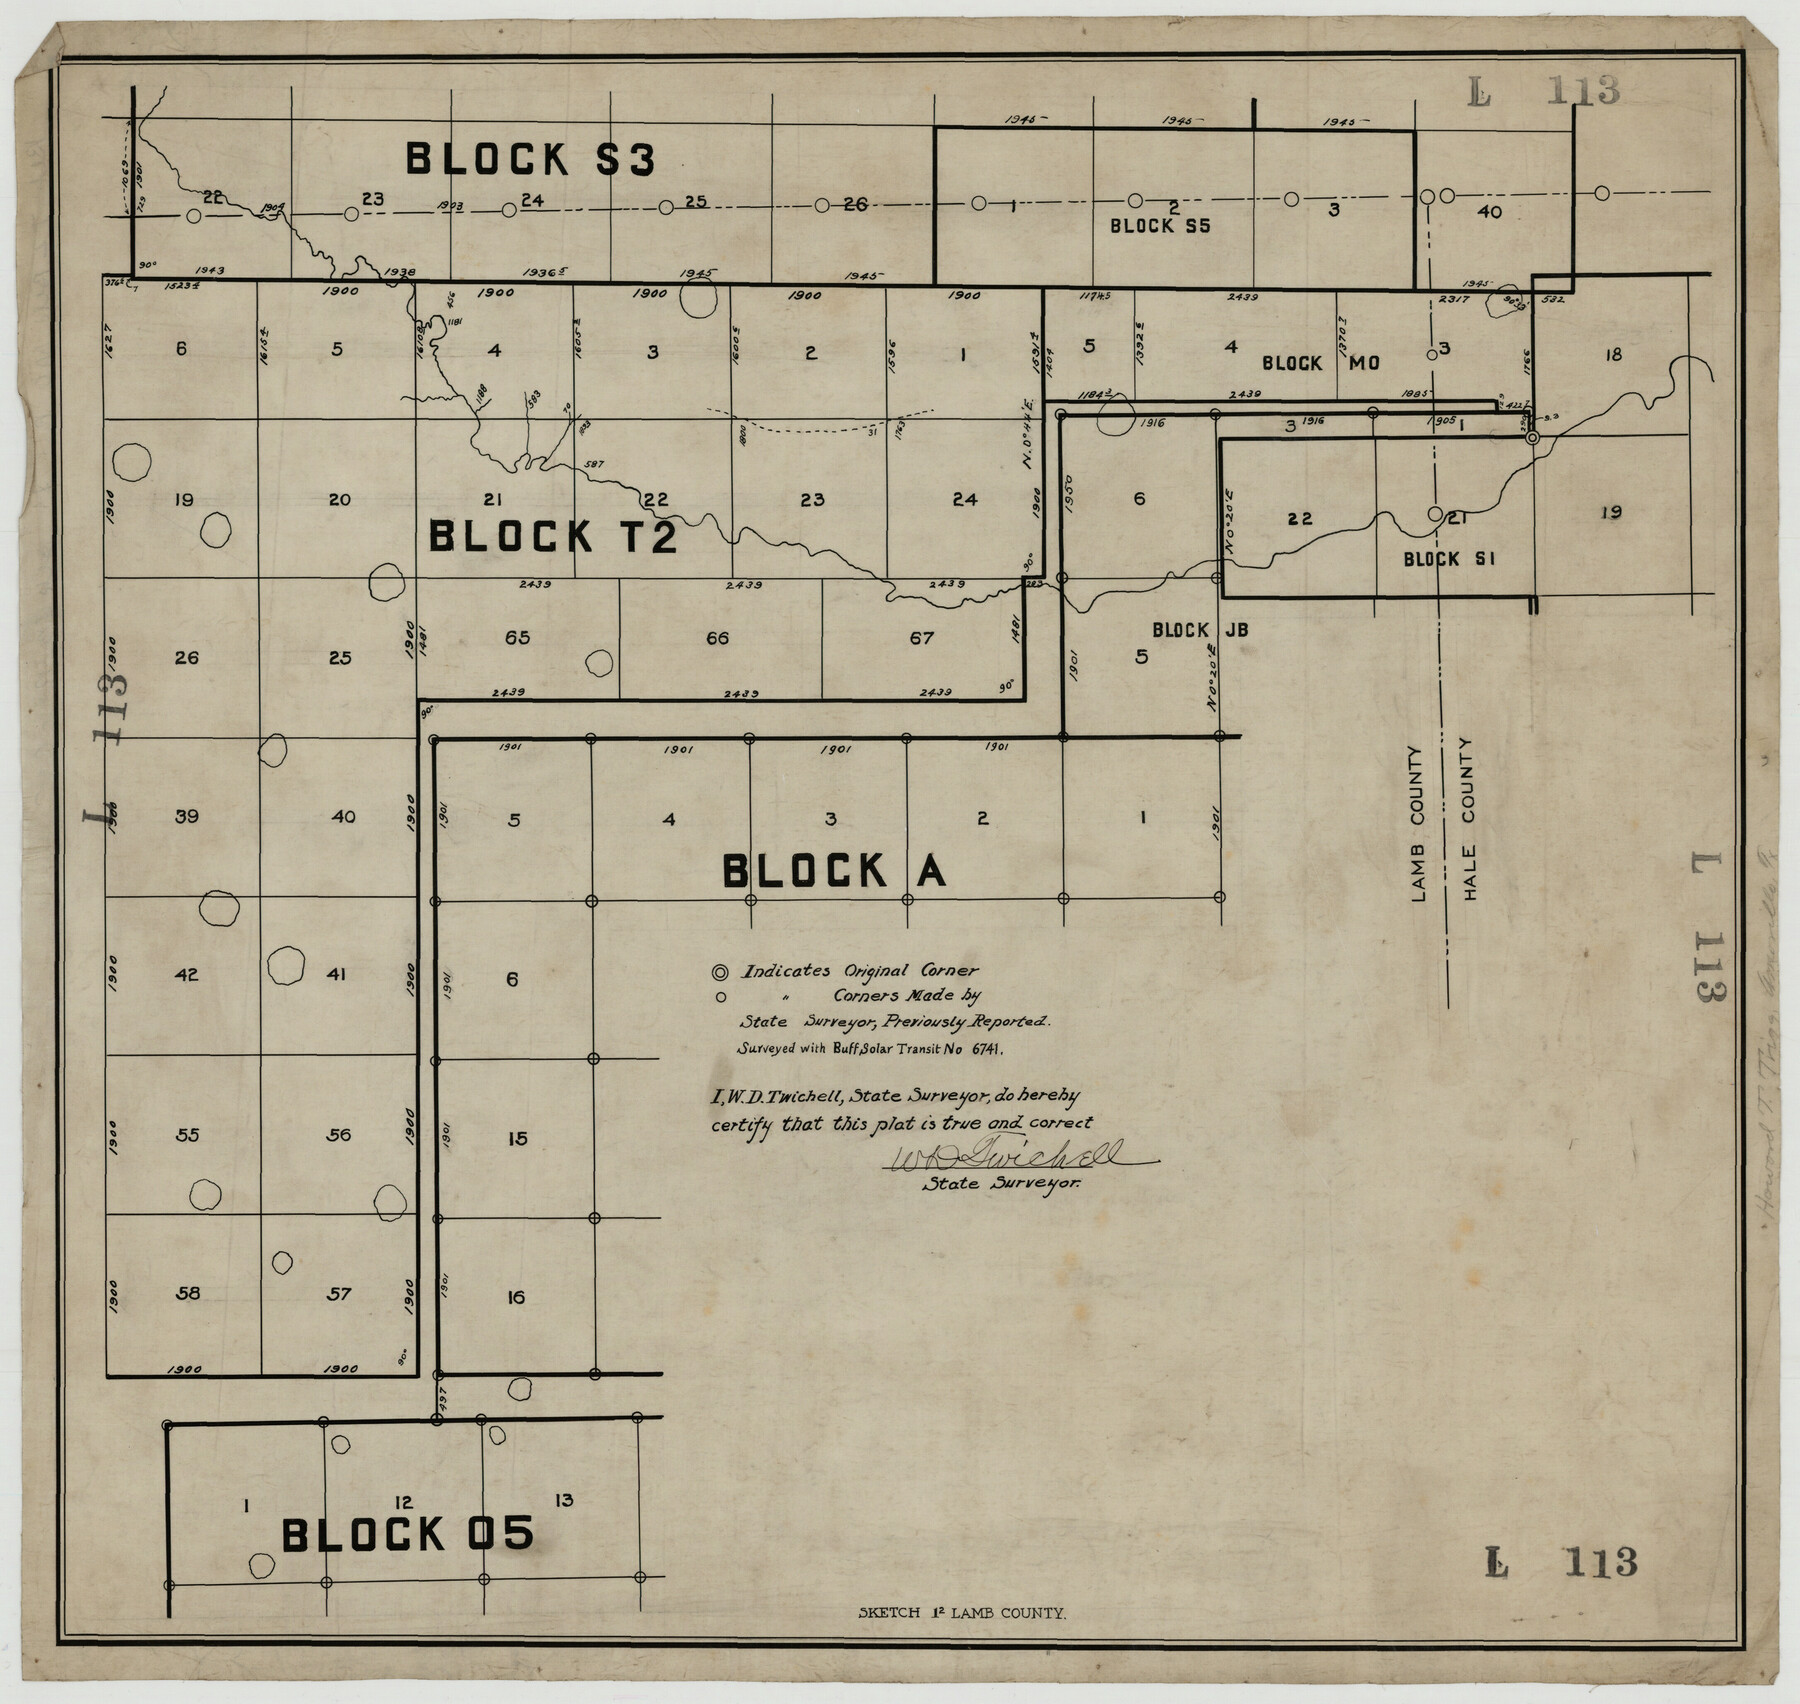 92177, [Blocks S3, T2, A, O5, and vicinity], Twichell Survey Records